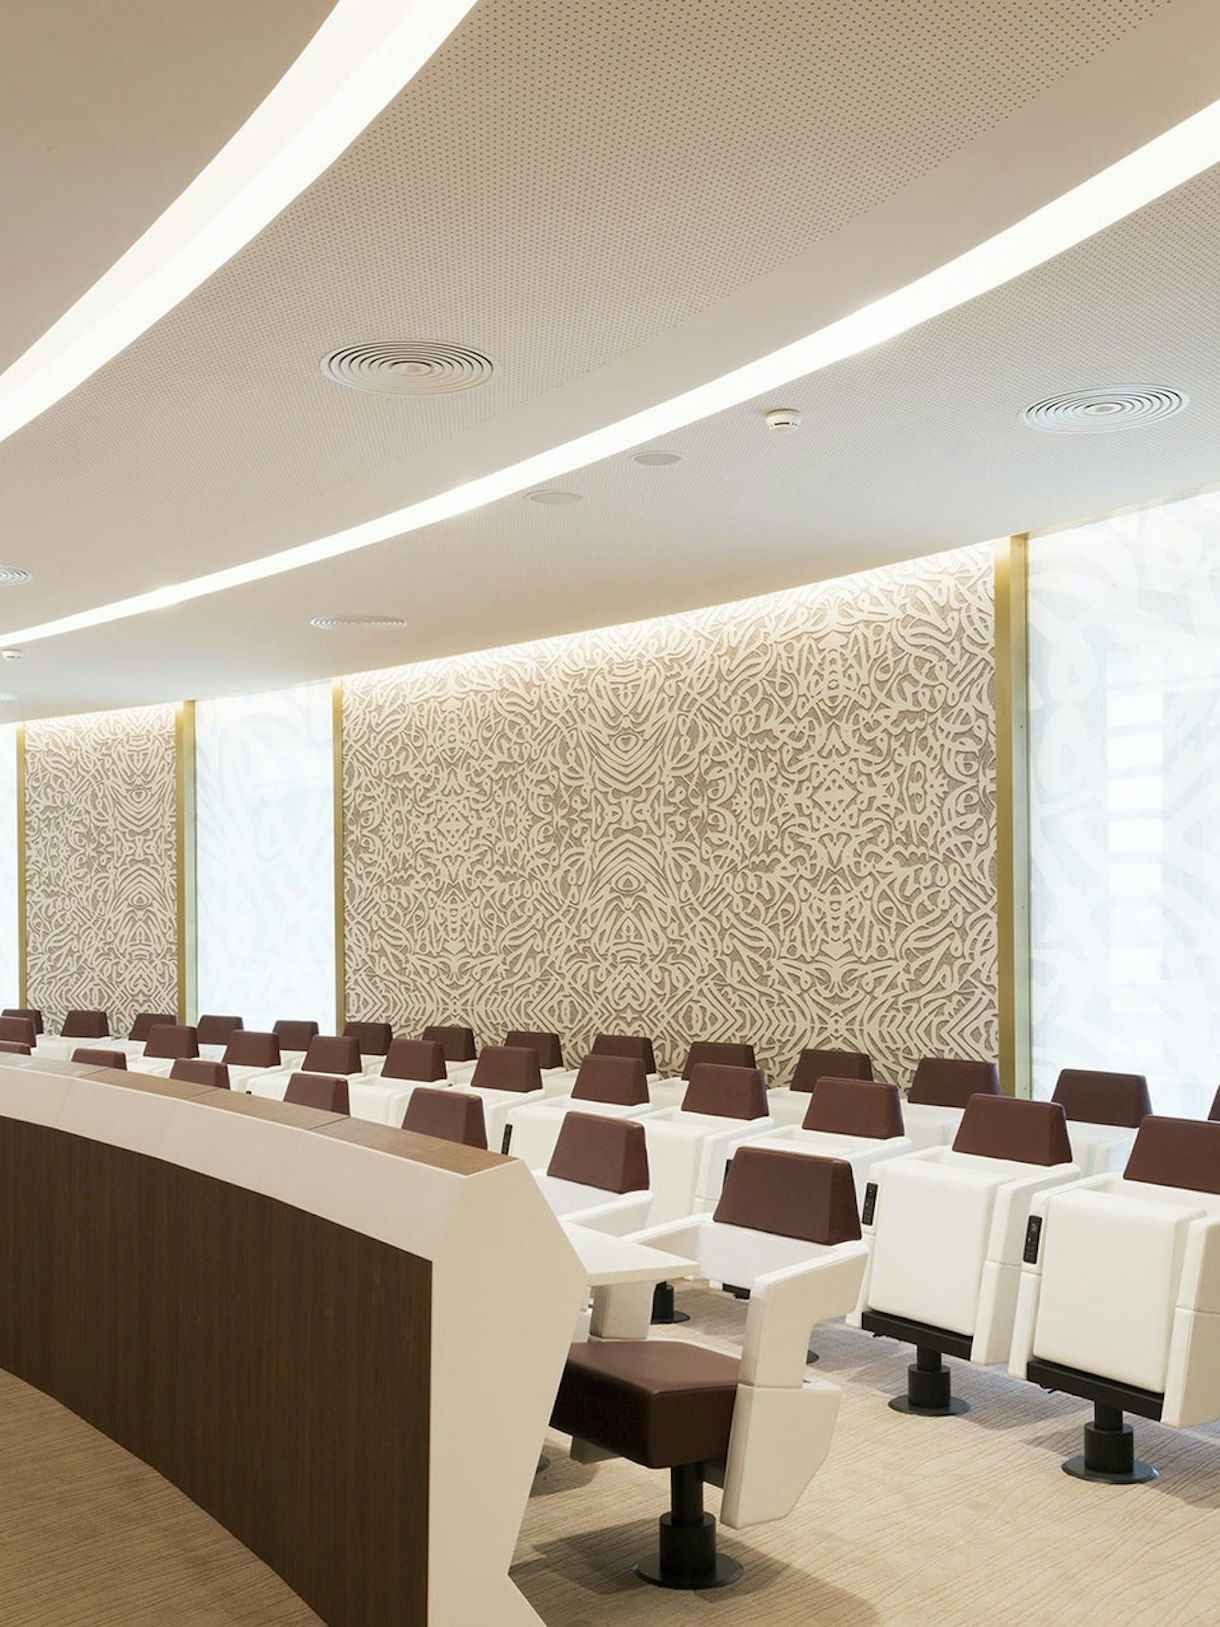 special-united-nation-conference-room-flos-08